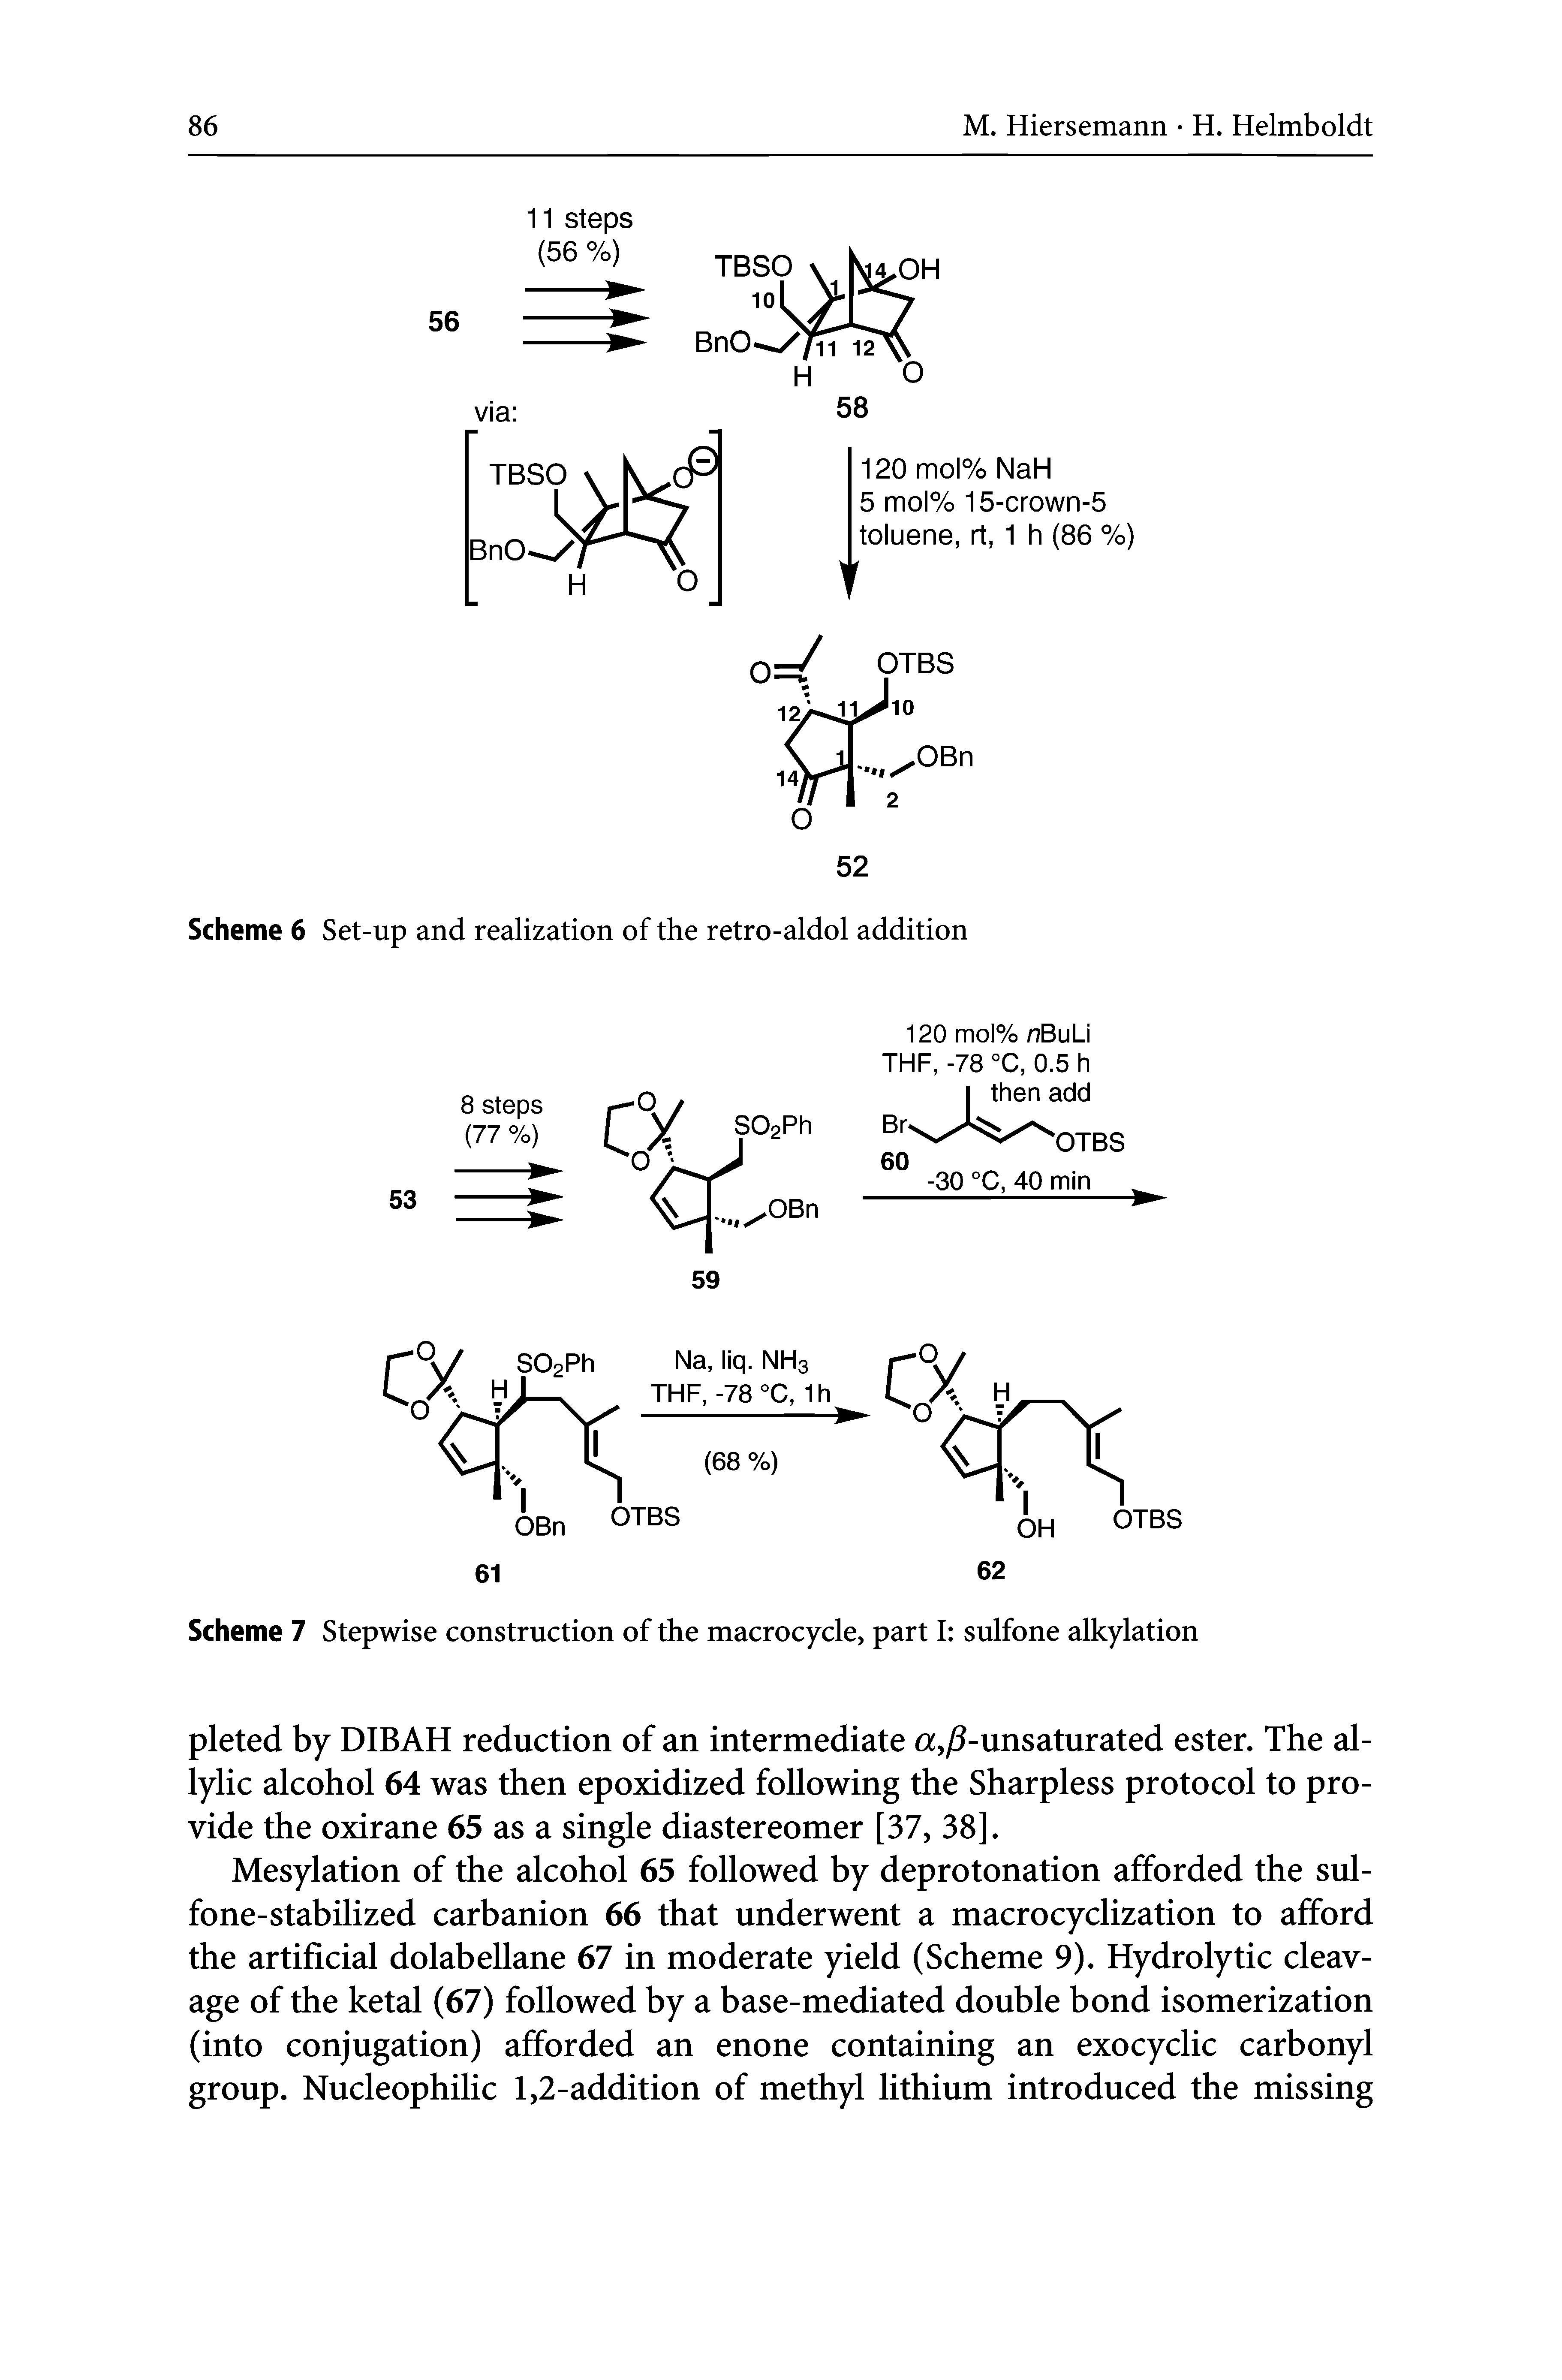 Scheme 7 Stepwise construction of the macrocycle, part I sulfone alkylation...